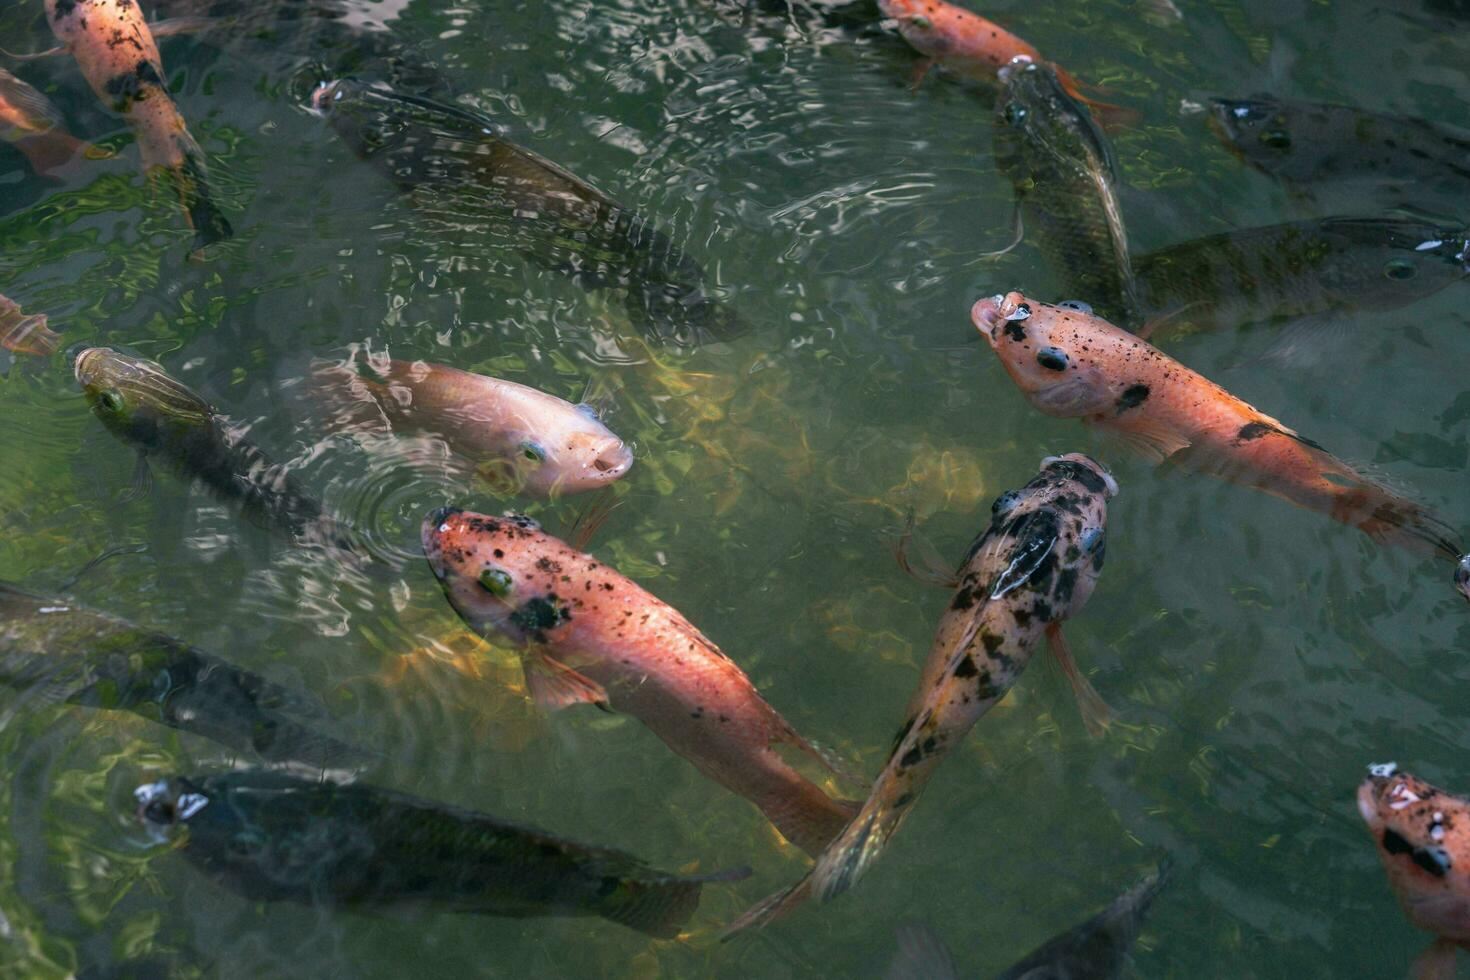 Close up of various koi fish swimming in a pond. Beautiful, exotic, colorful, bokeh backgrounds. photo